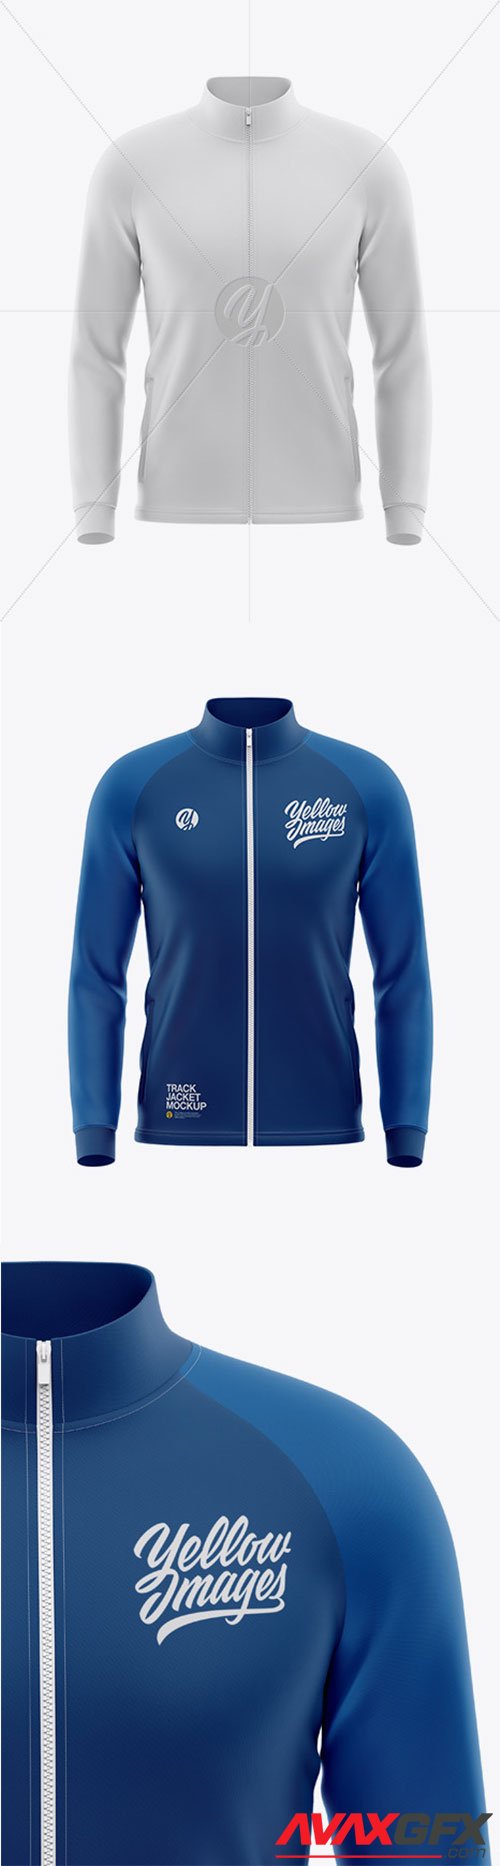 Download Men S Raglan Track Jacket Mockup Front View 61921 Avaxgfx All Downloads That You Need In One Place Graphic From Nitroflare Rapidgator